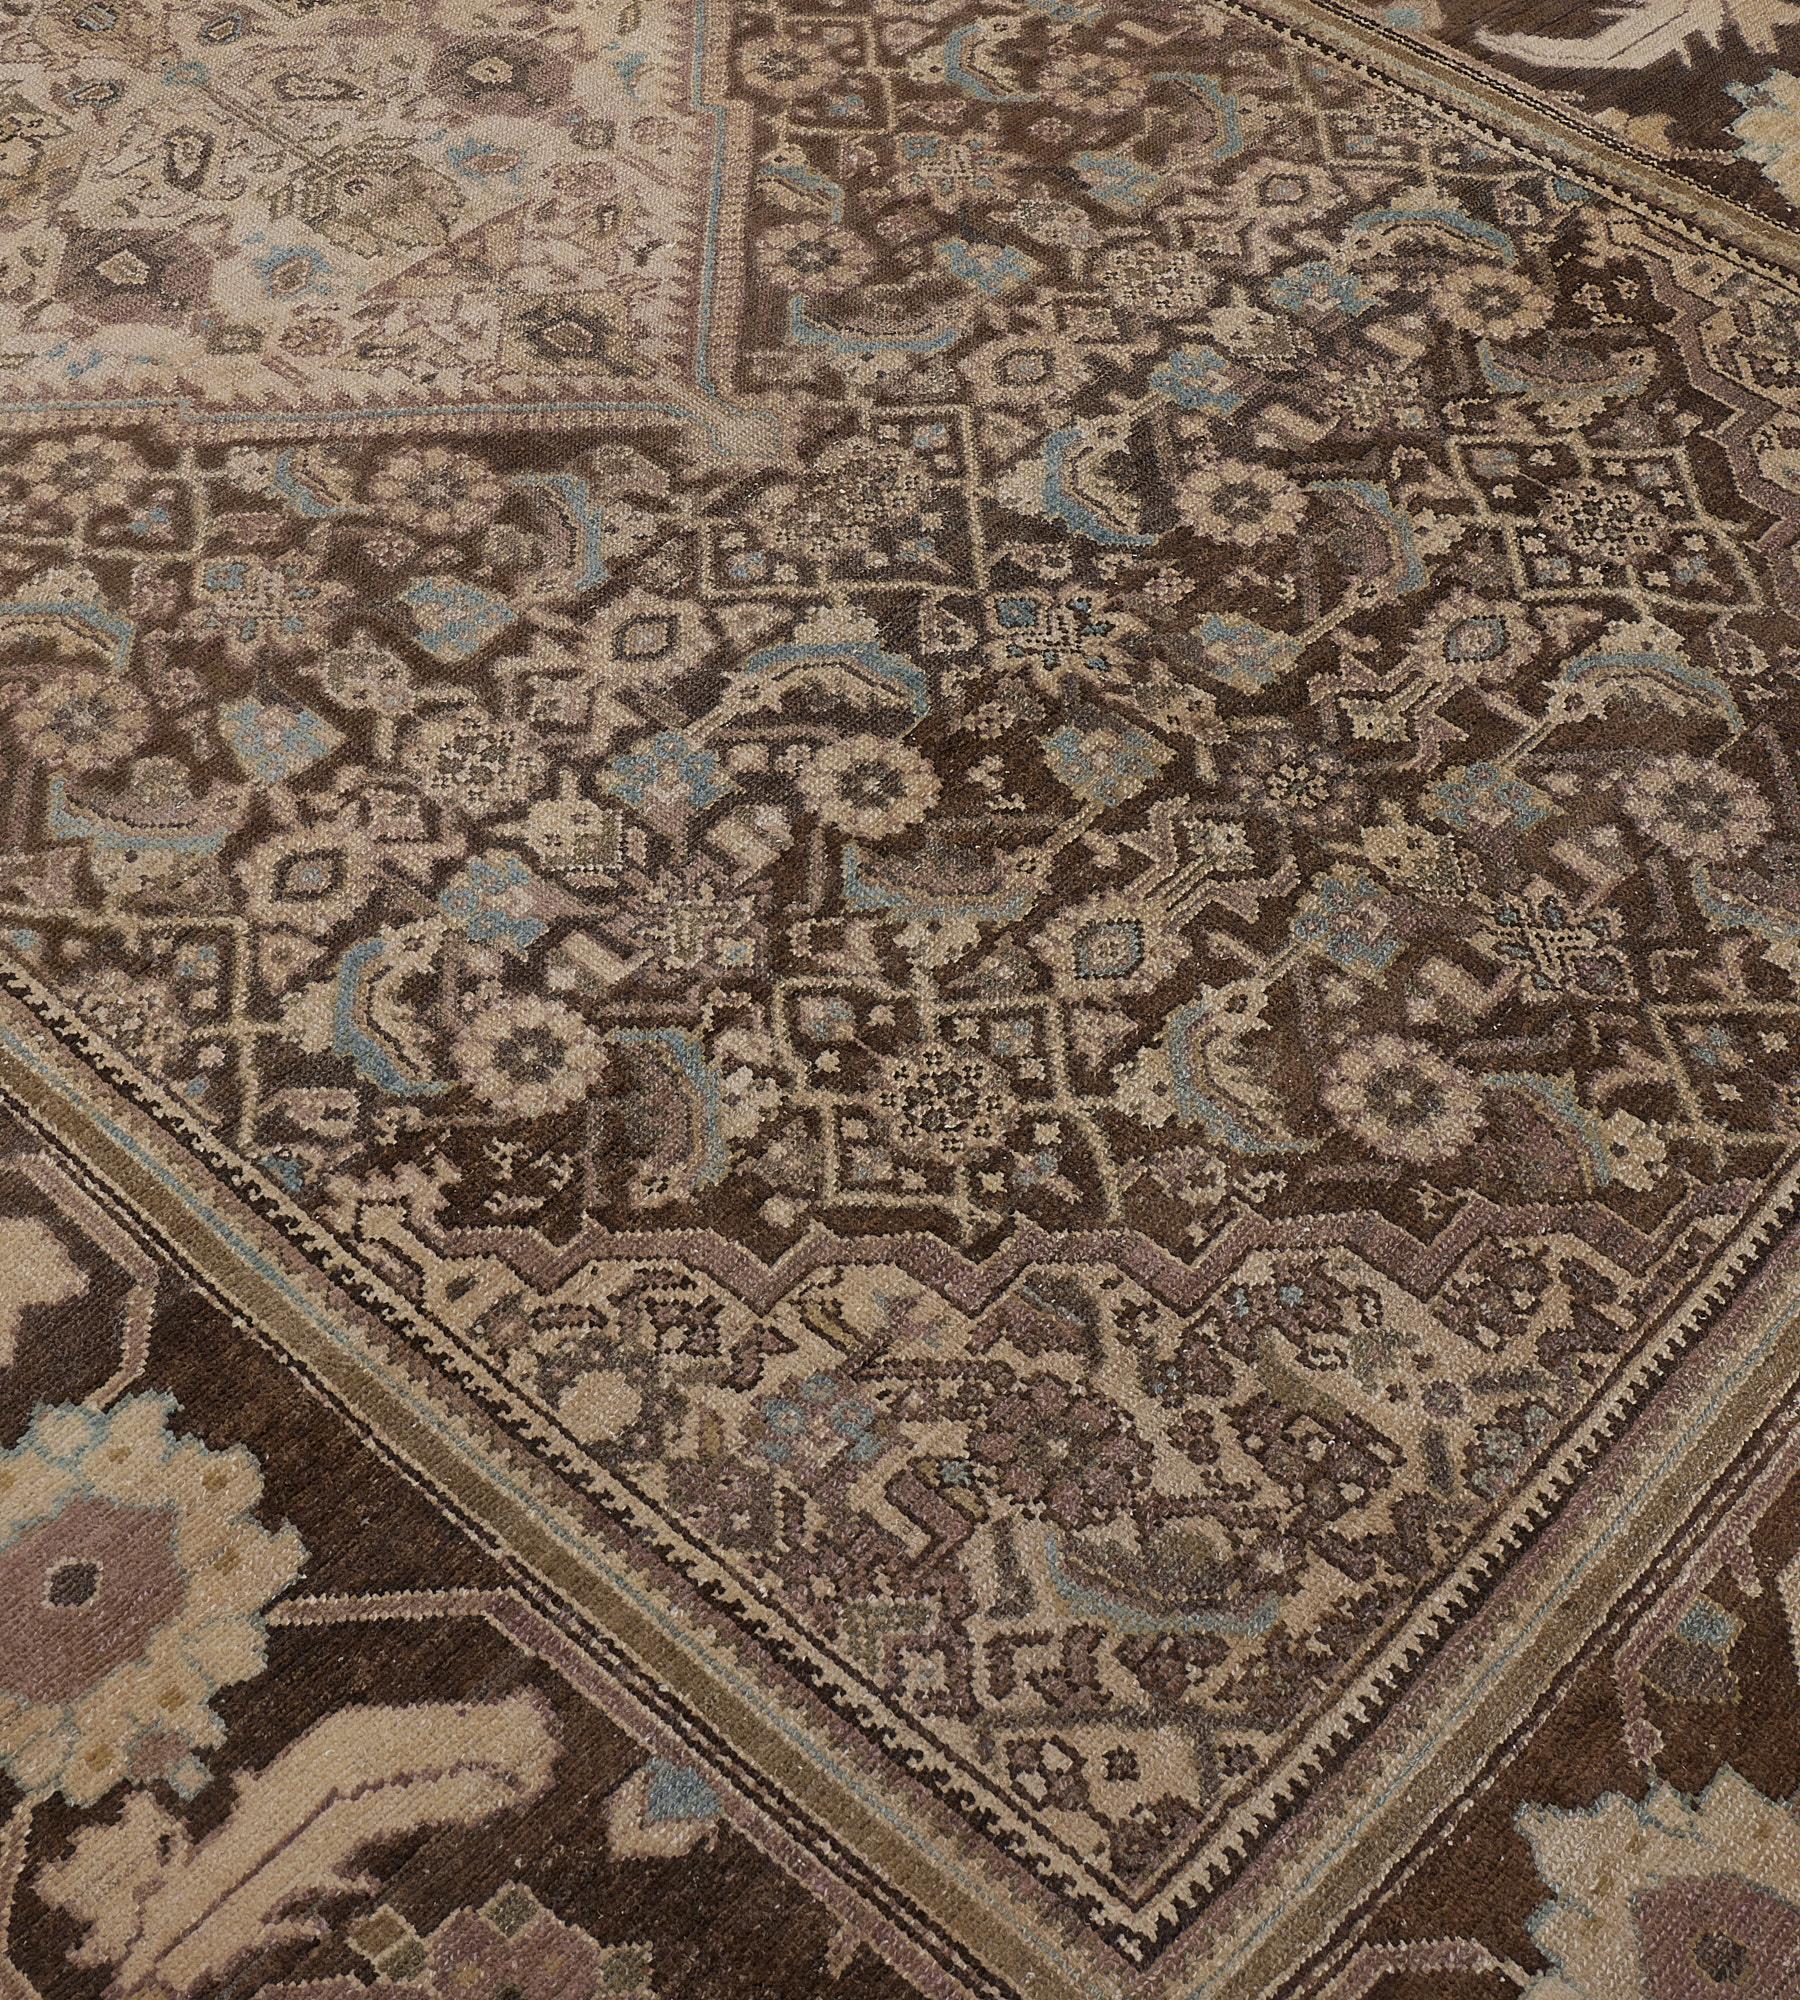 This traditional hand-woven Persian Malayer rug has a shaded chocolate brown field of dense herati pattern enclosing a serrated lozenge medallion enclosing an ornate flowering vase, in similar stepped herati spandrels, in a complementary palmette